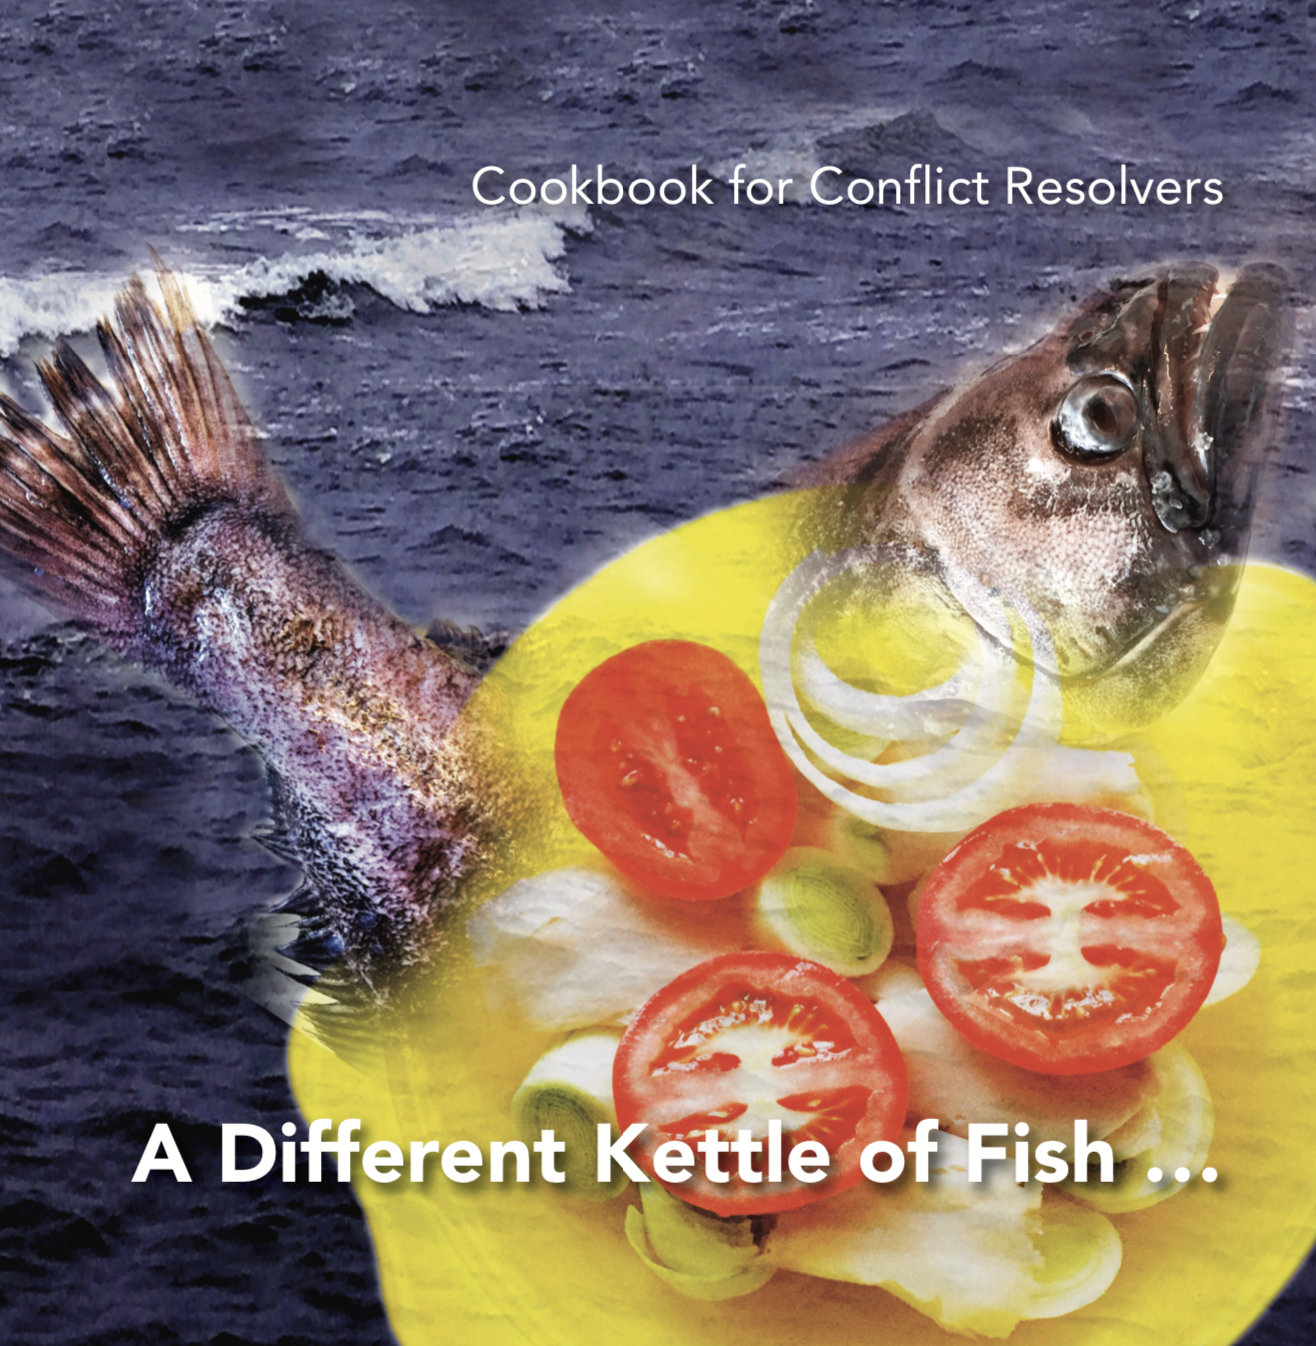 Cookbook for Conflict Resolvers 2 – A Different Kettle of Fish